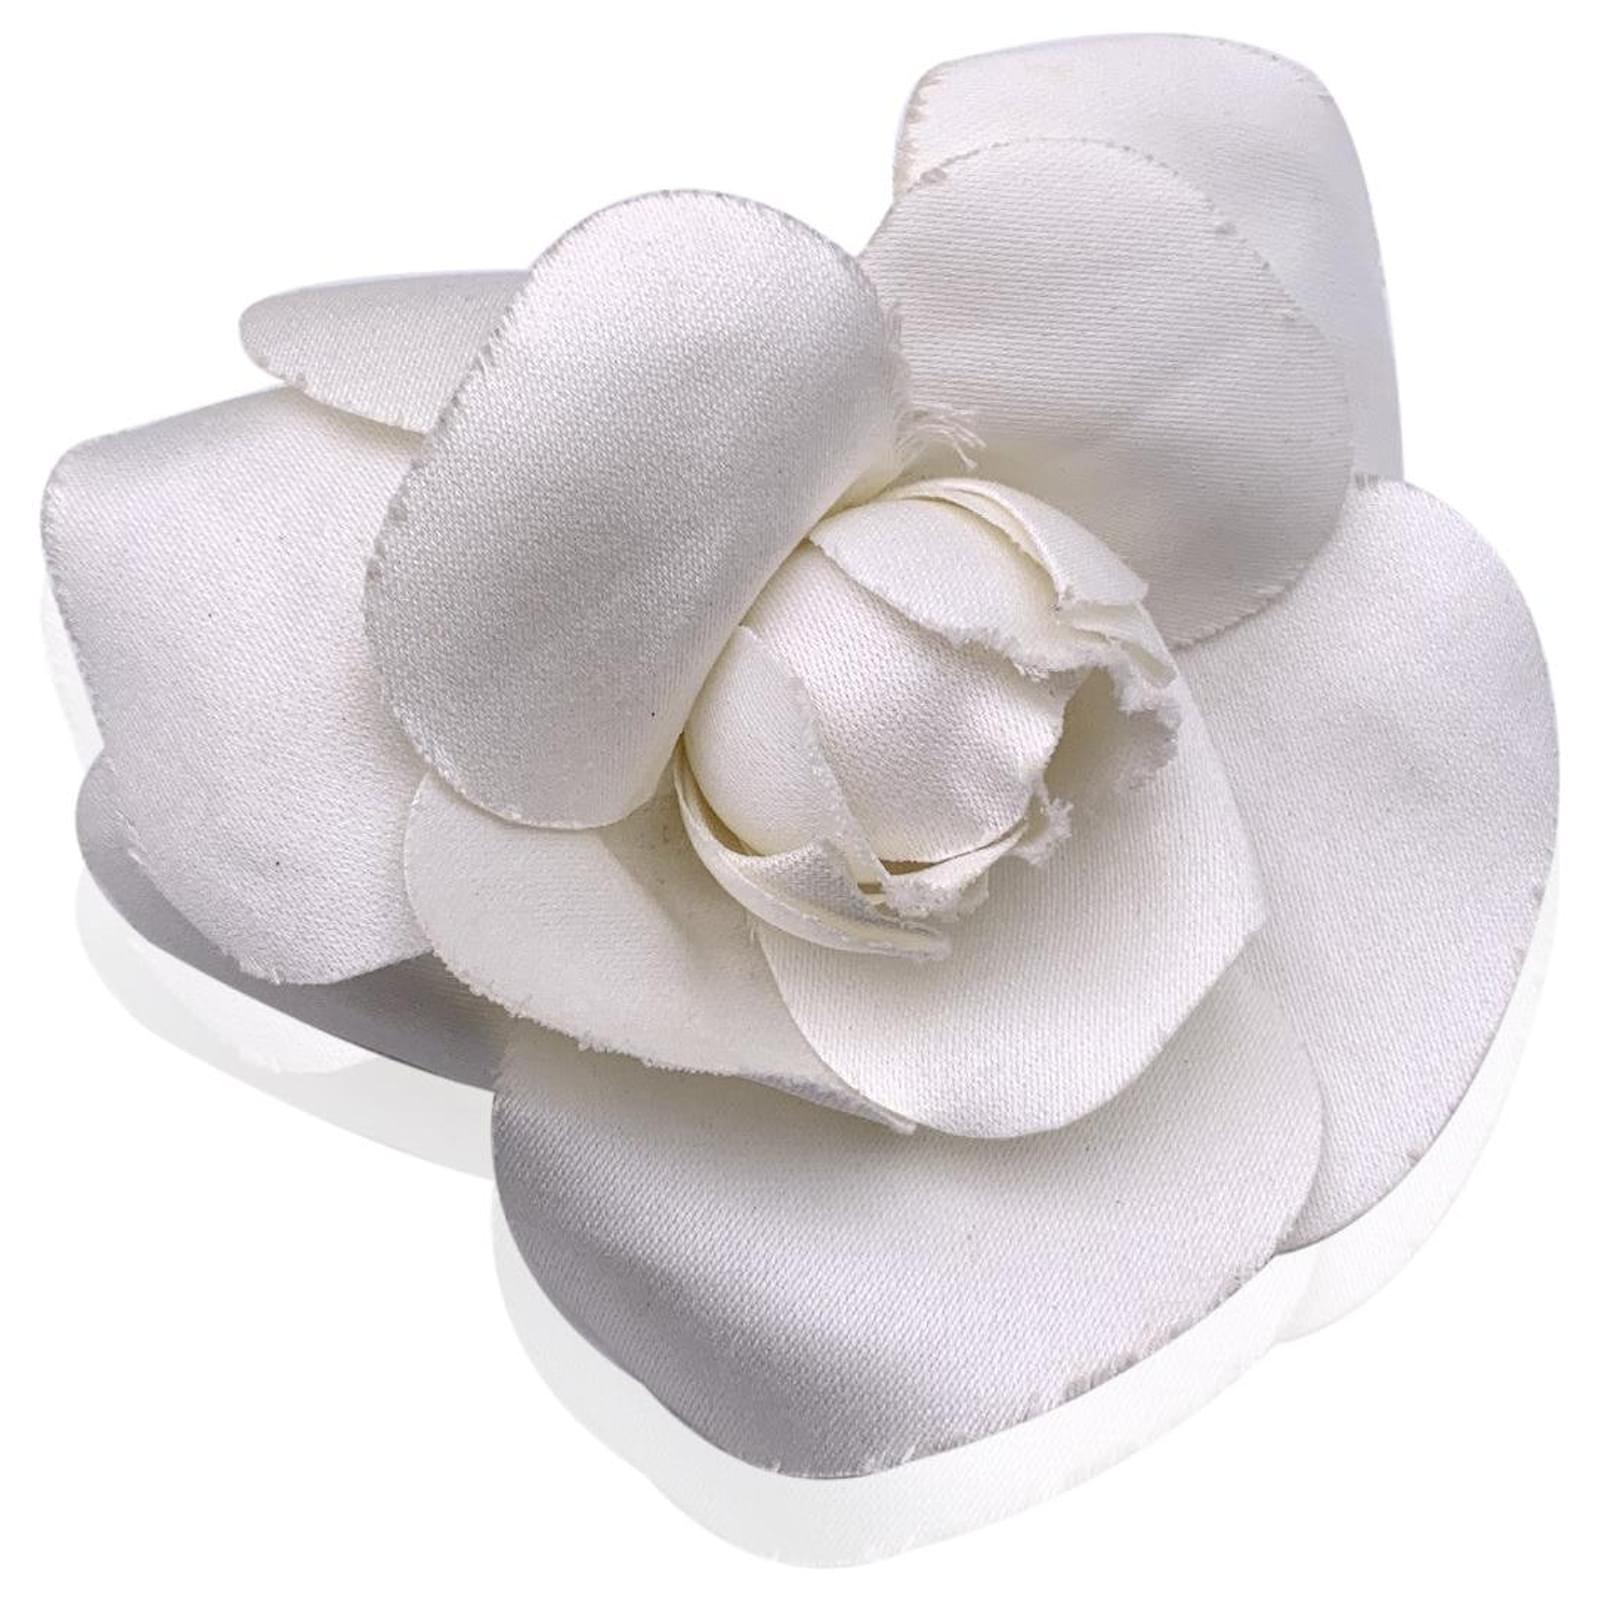 Camellia Brooch Pin Camellia Flower Pin Leather Brooch Pin For Women